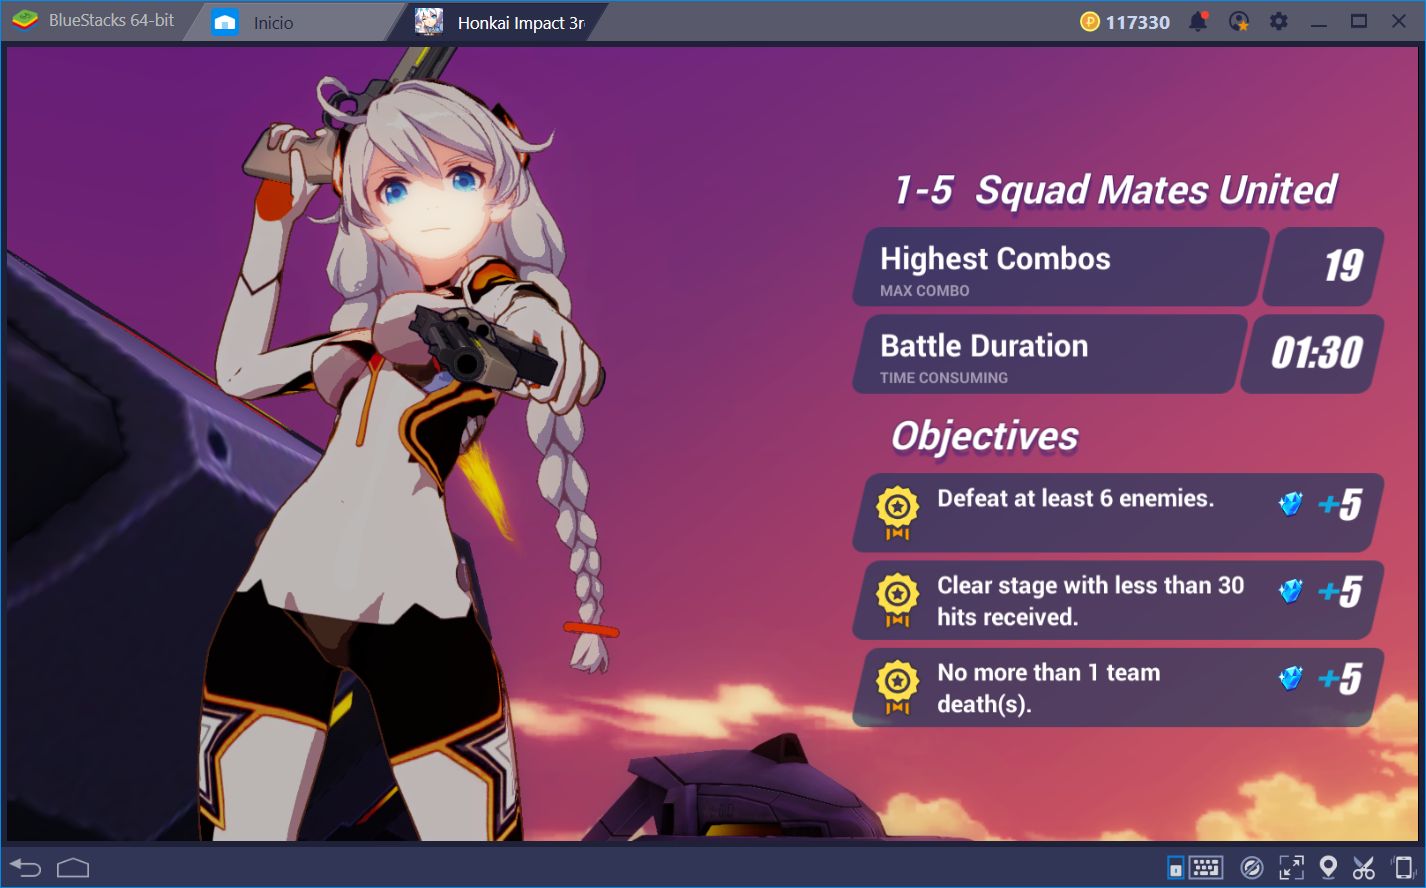 Honkai Impact 3rd—The Best Action Game on BlueStacks?